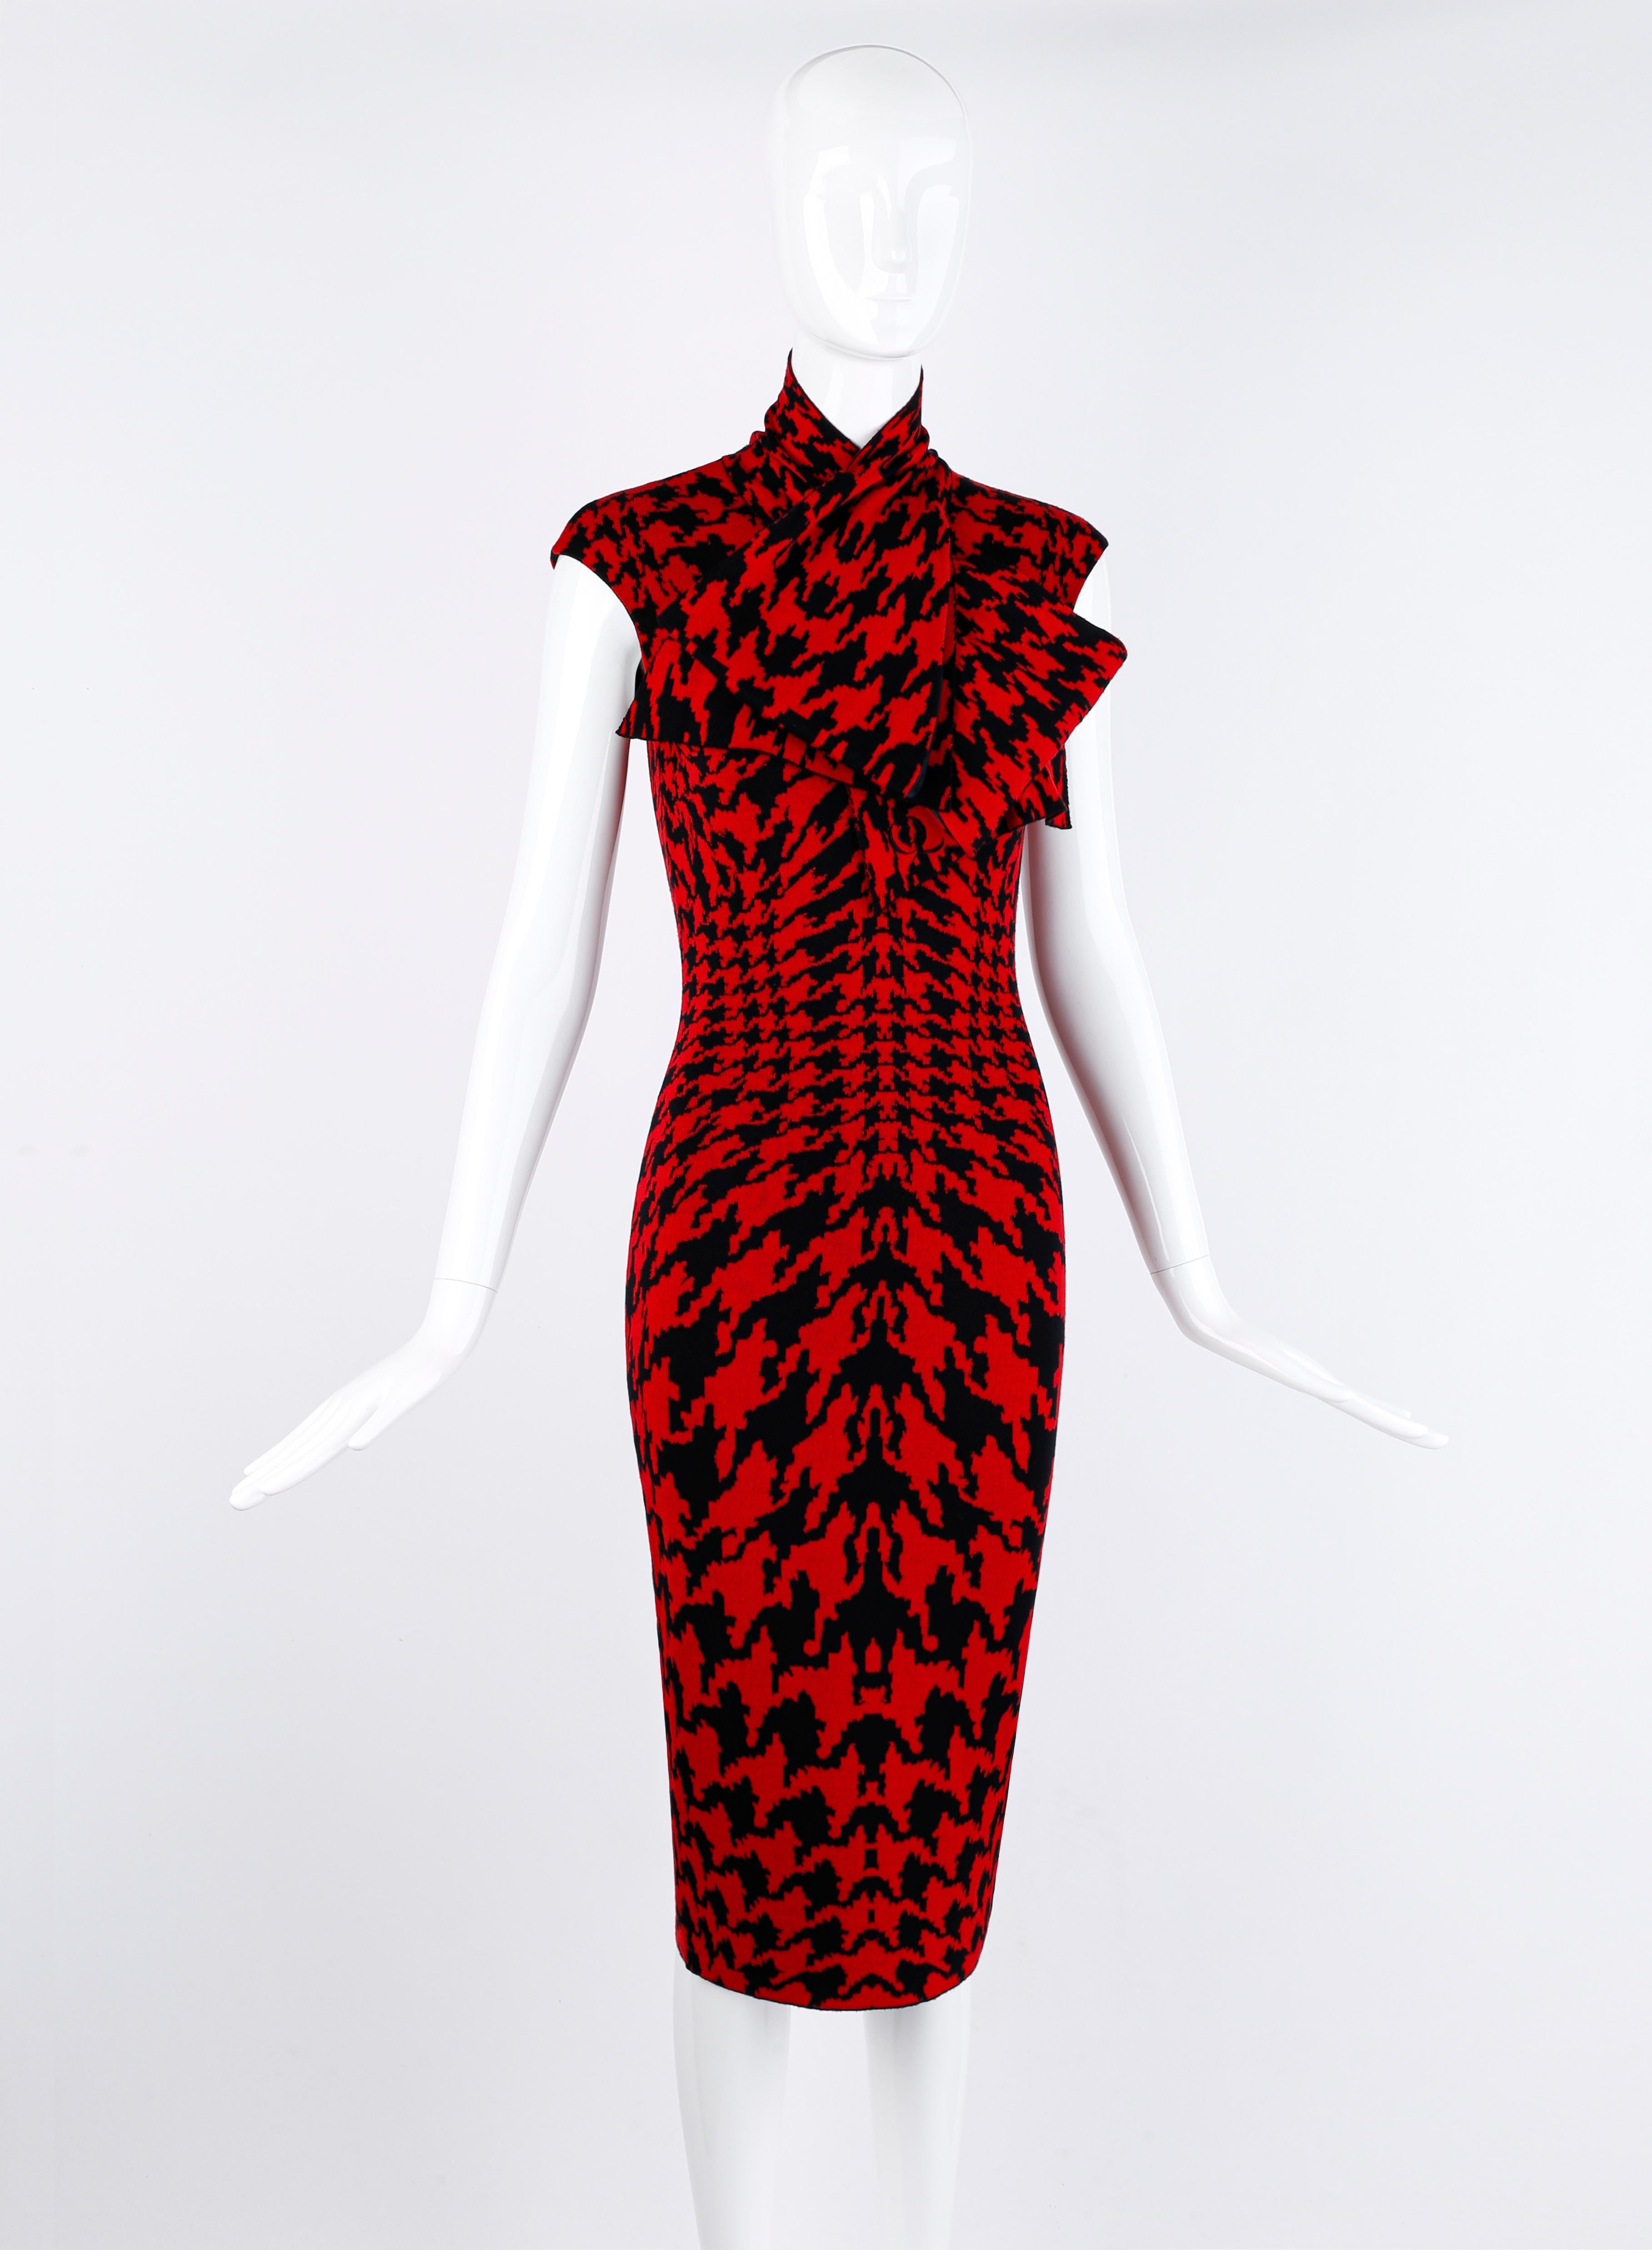 Designed by Alexander McQueen for the fall/winter 2009 collection. Red and black knit houndstooth pattern, in varied sizes to accentuate the figure. Sleeveless, form-fitting. Material has some stretch to it. Oversized bow at neckline. Bow can be